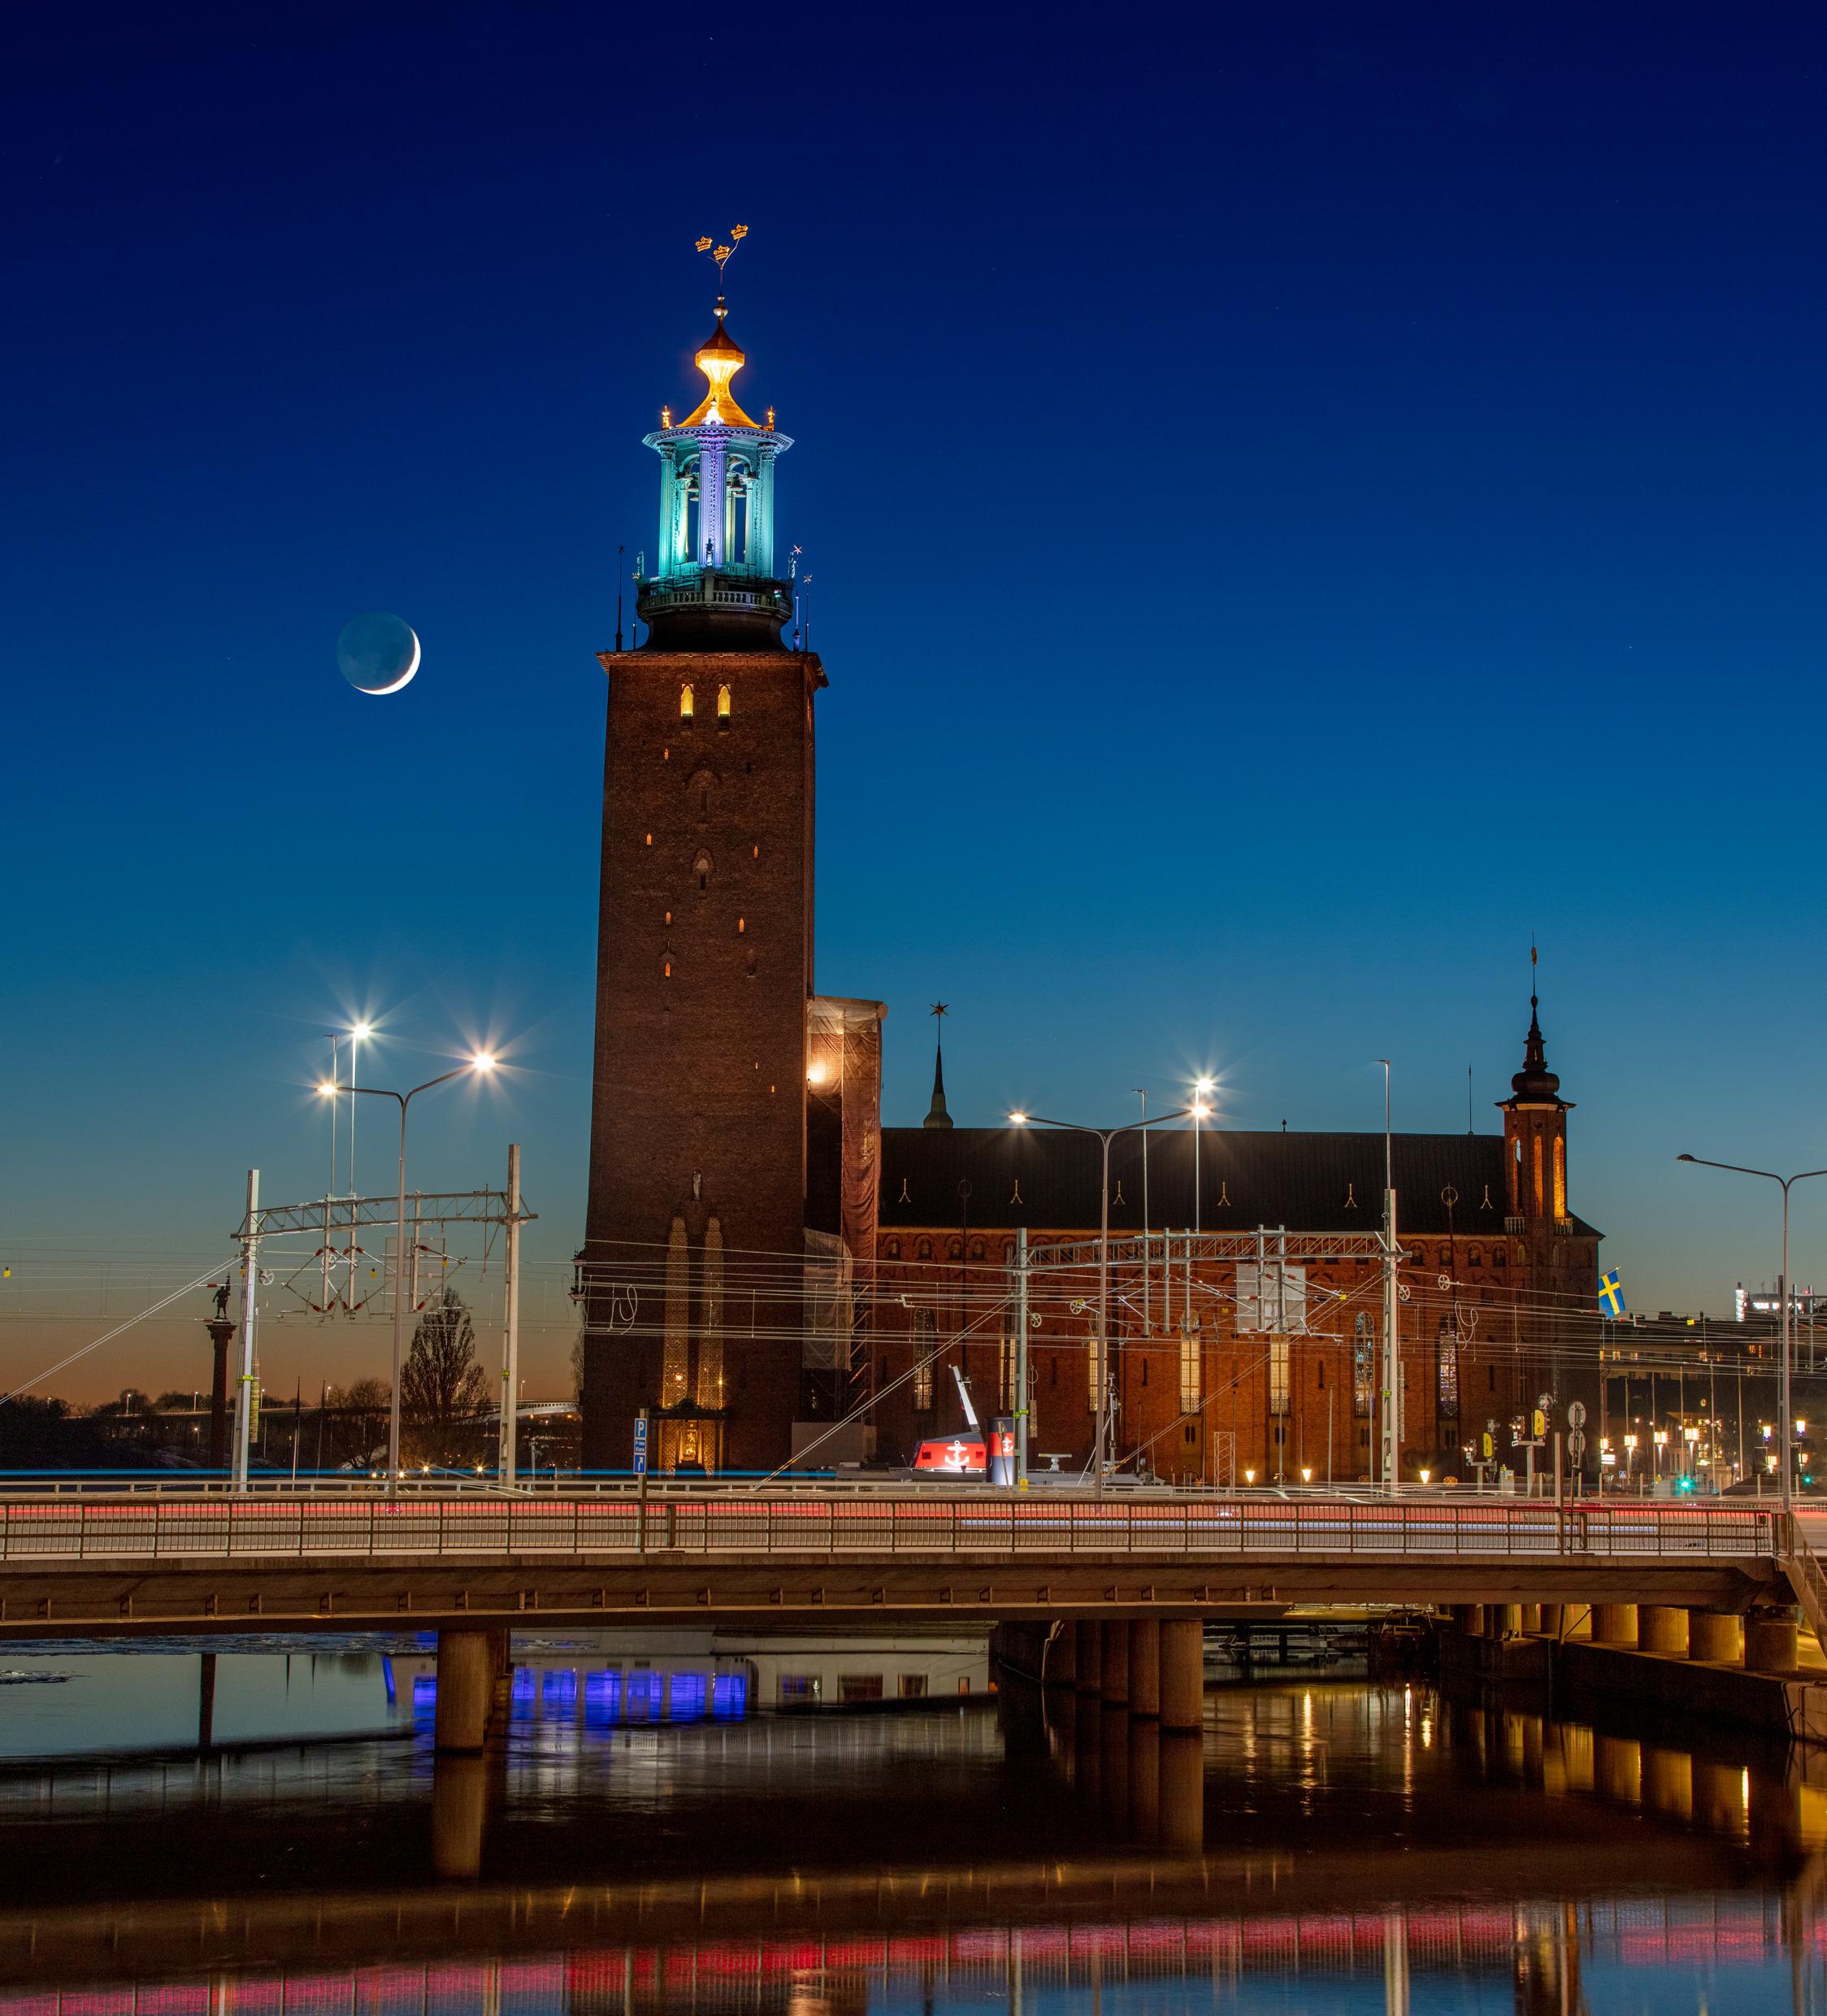 The new moon shines behind a large brick building with a huge clock tower.